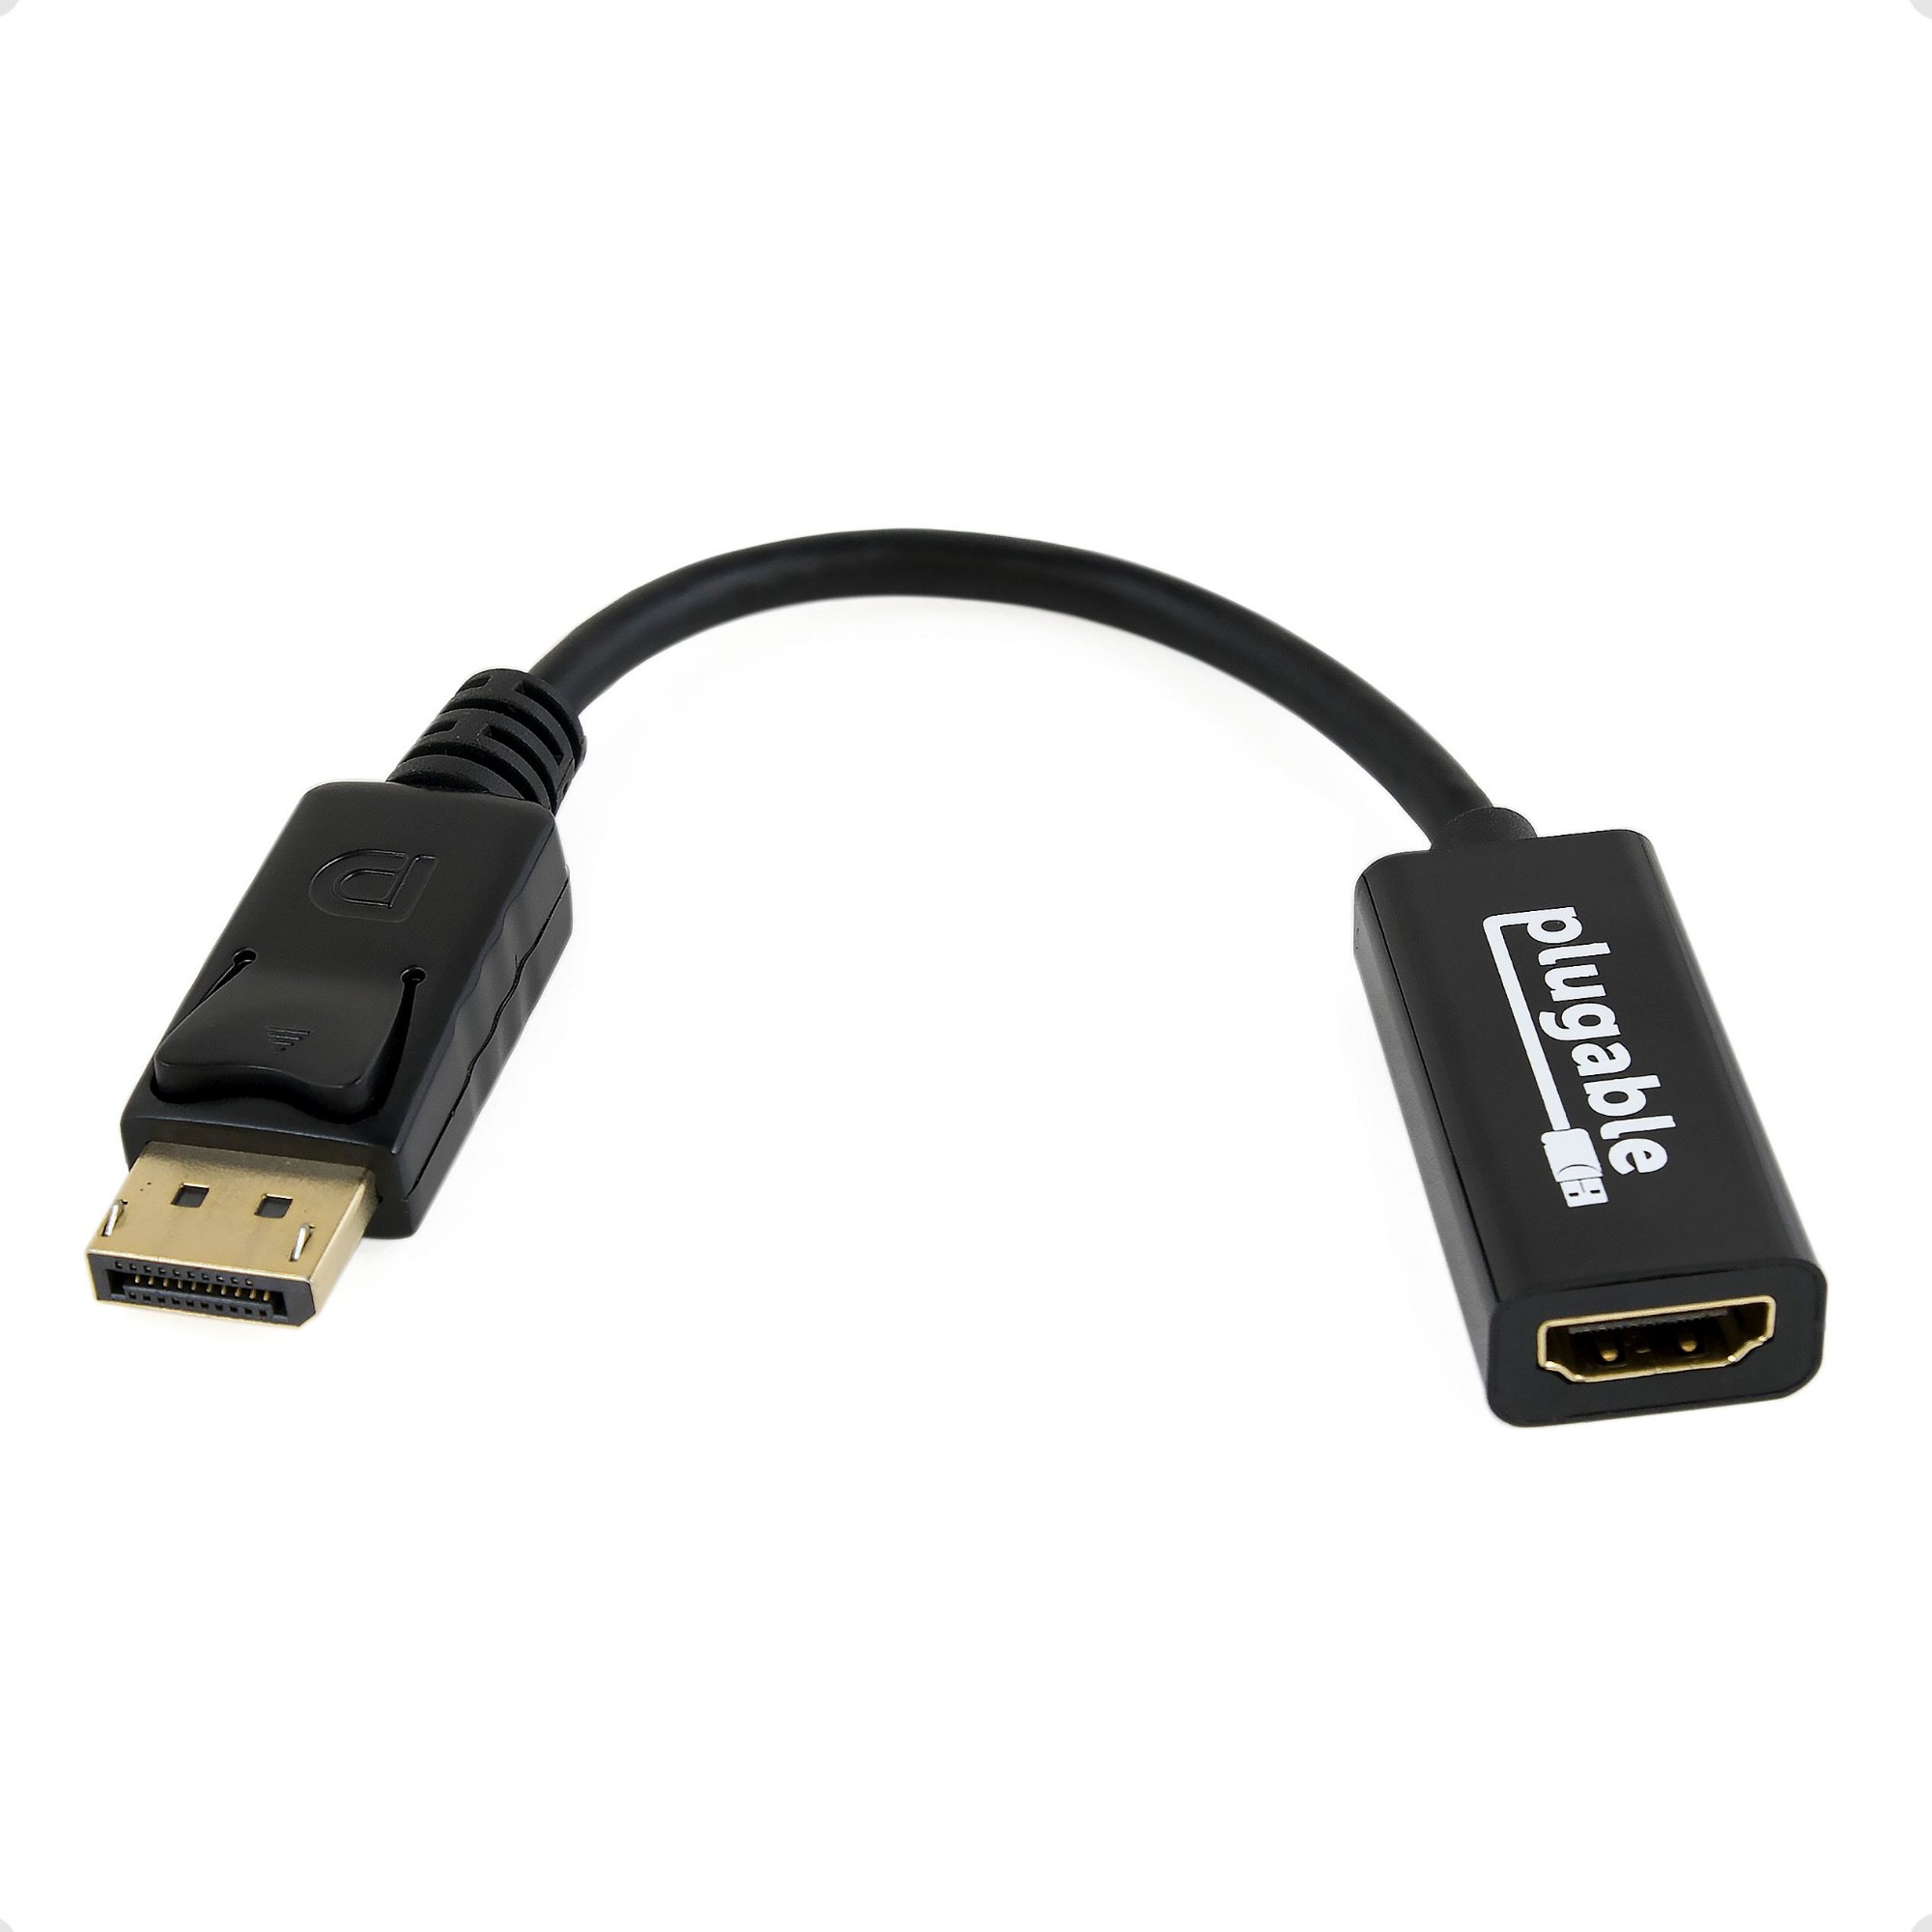 DPM-HDMIF PLUGABLE TECHNOLOGIES Monitor Adapter - DP to HDMI